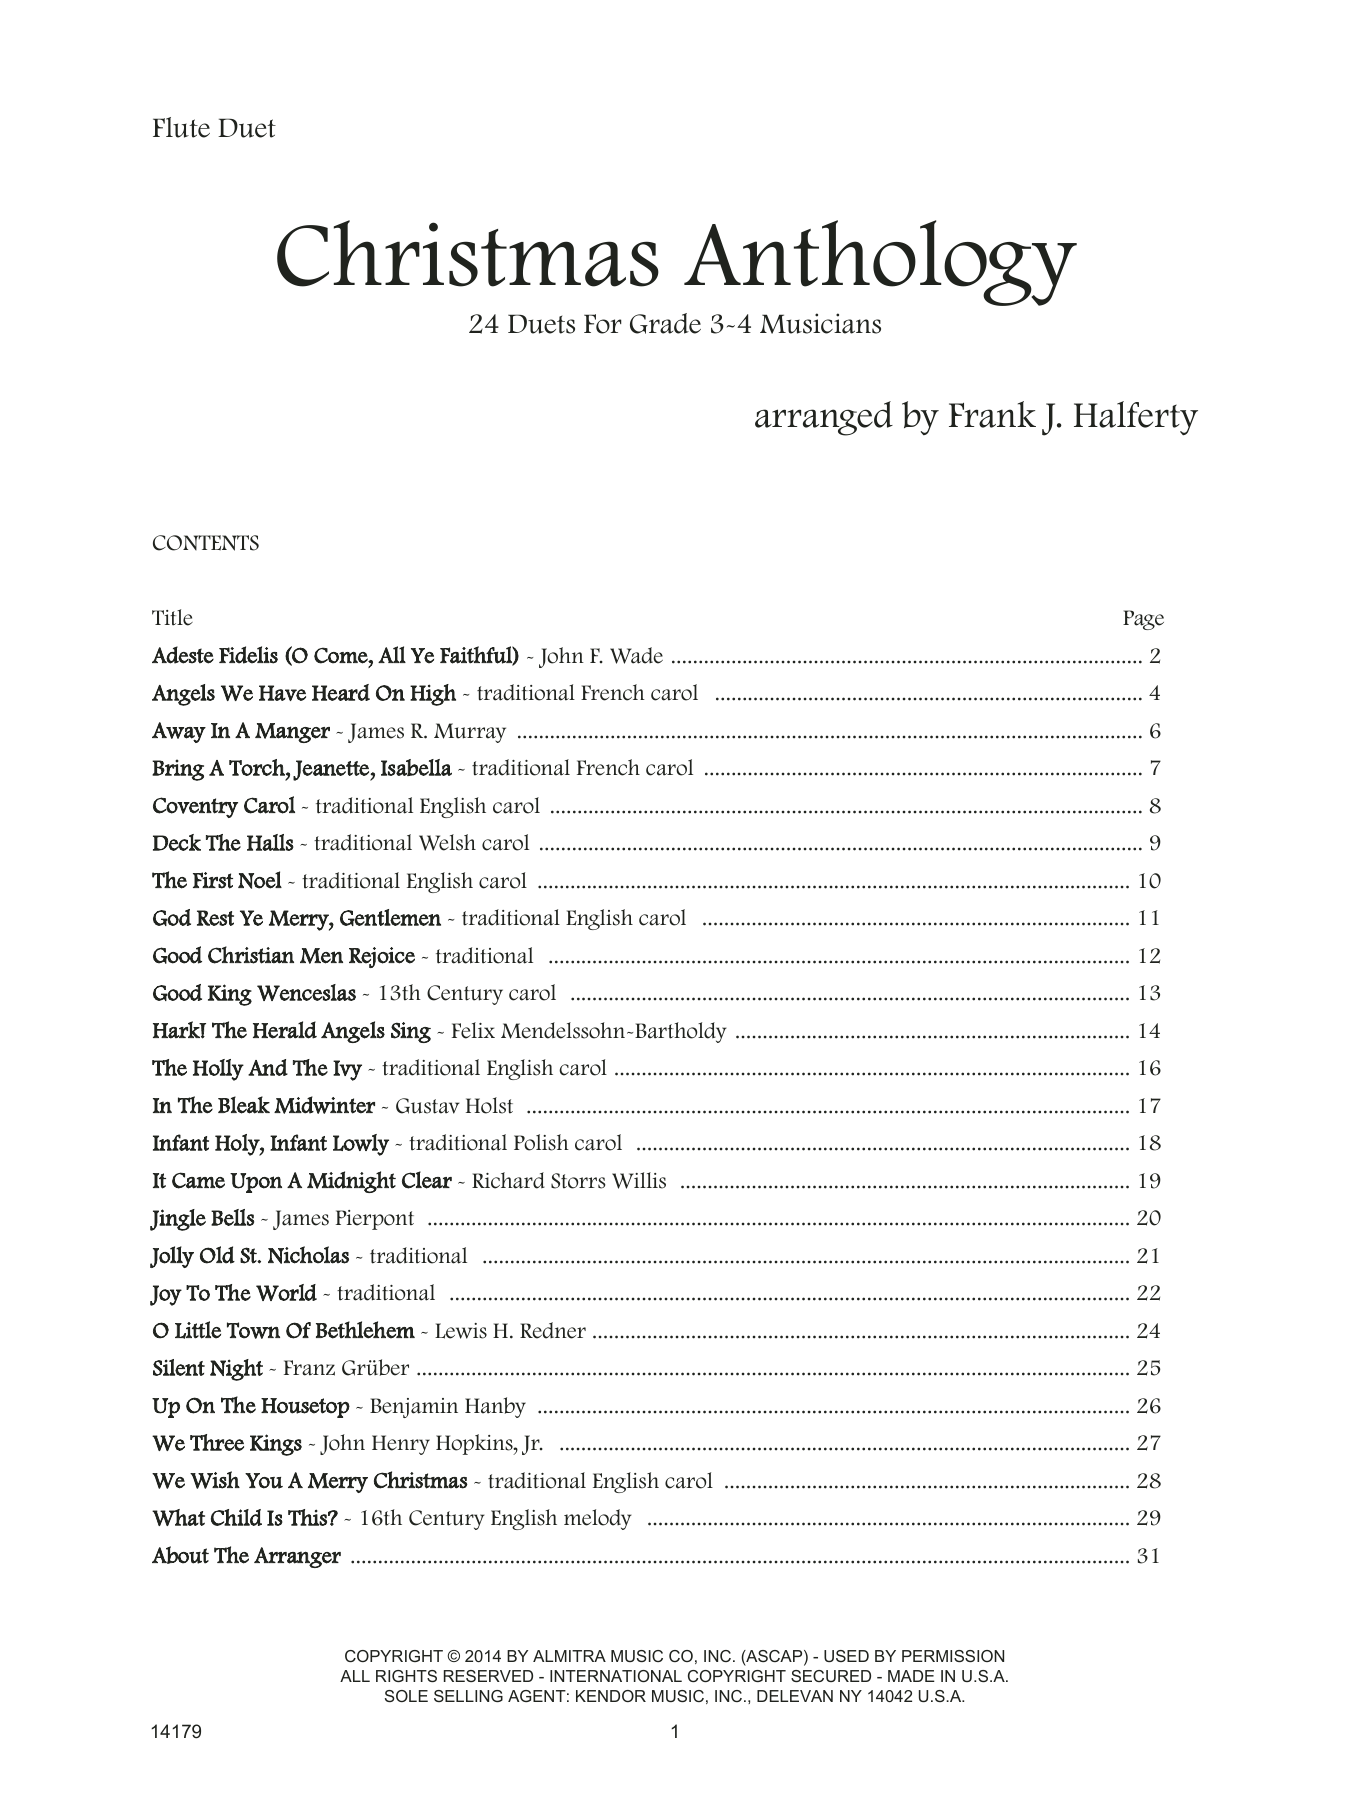 Christmas Anthology (24 Duets For Grade 3-4 Musicians) sheet music